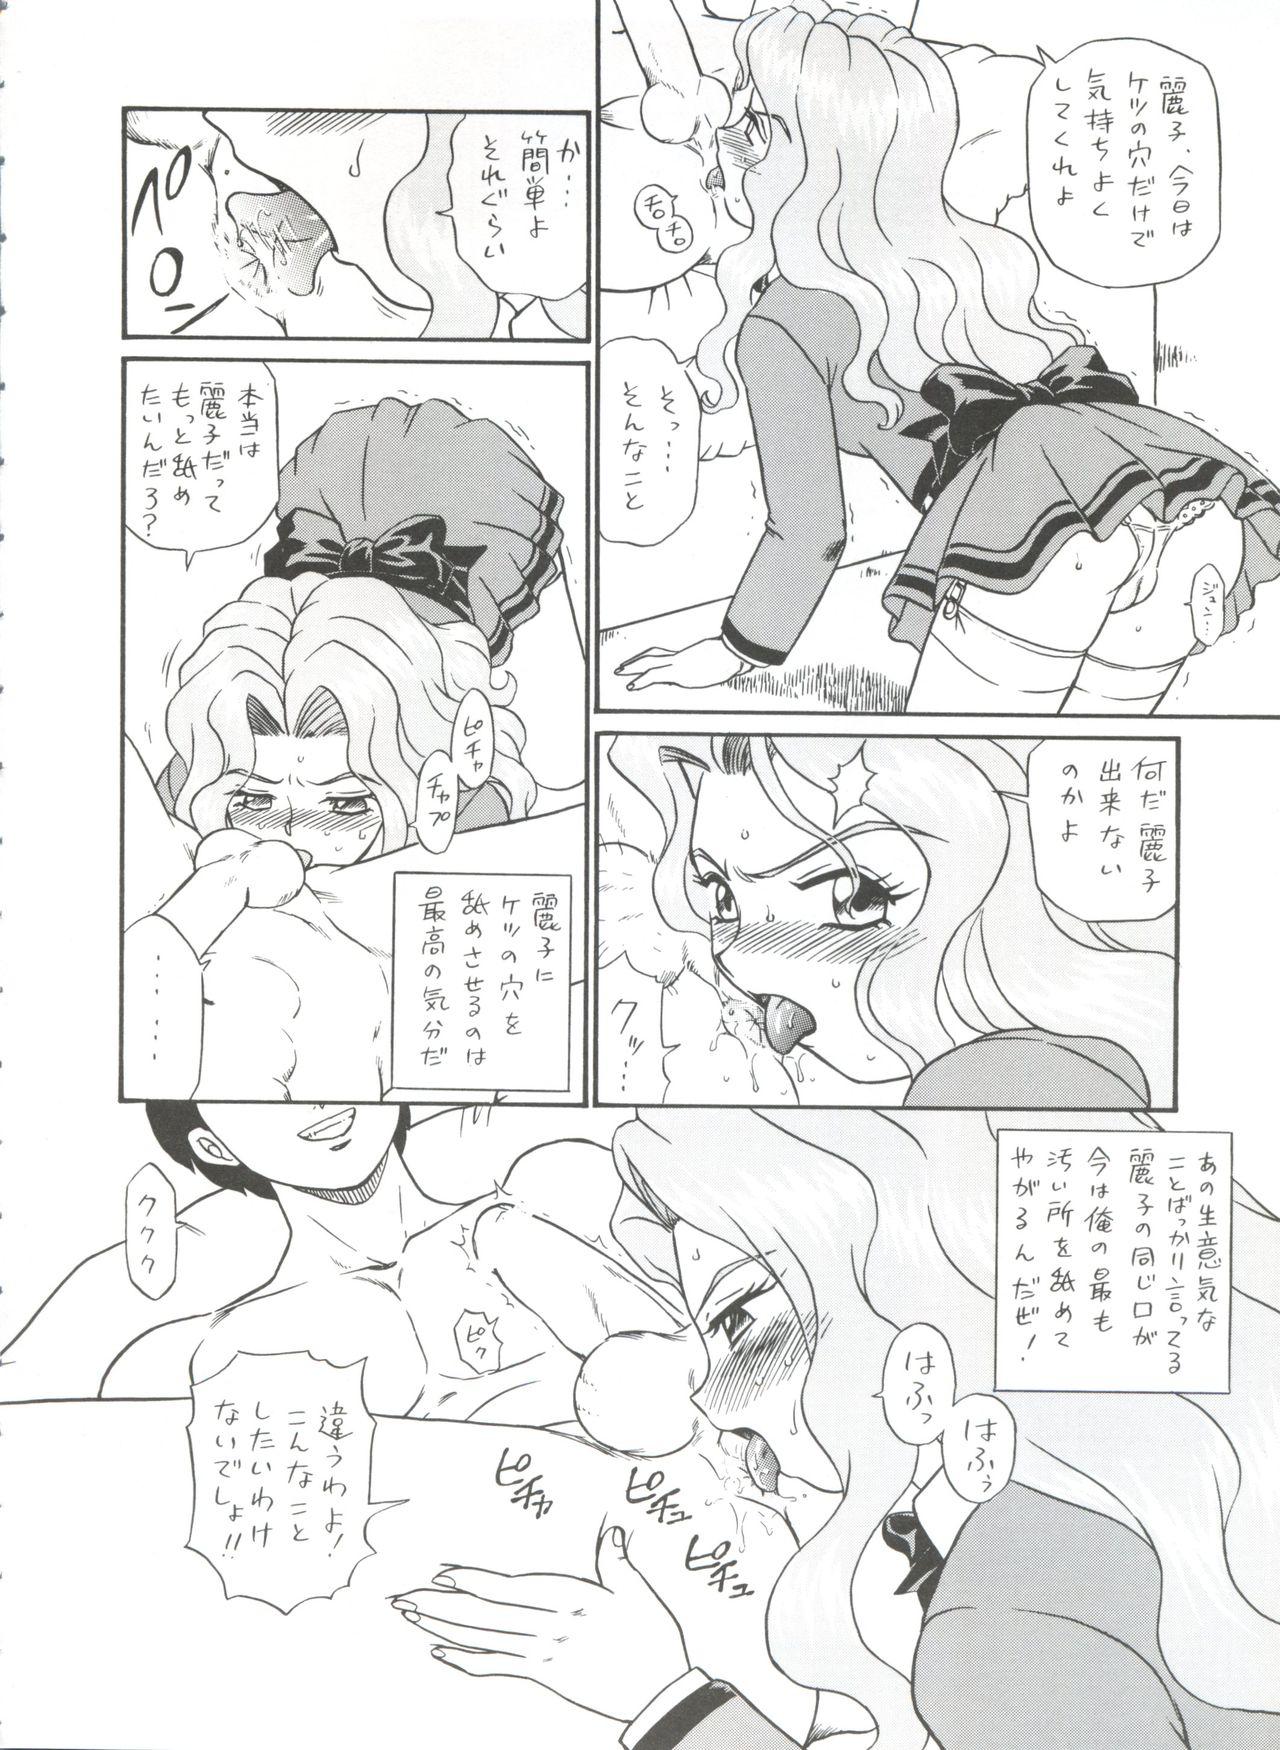 Mexicano Shippoppo Club House - Ghost sweeper mikami Kakyuusei Aim for the ace Jaja uma grooming up Whores - Page 6